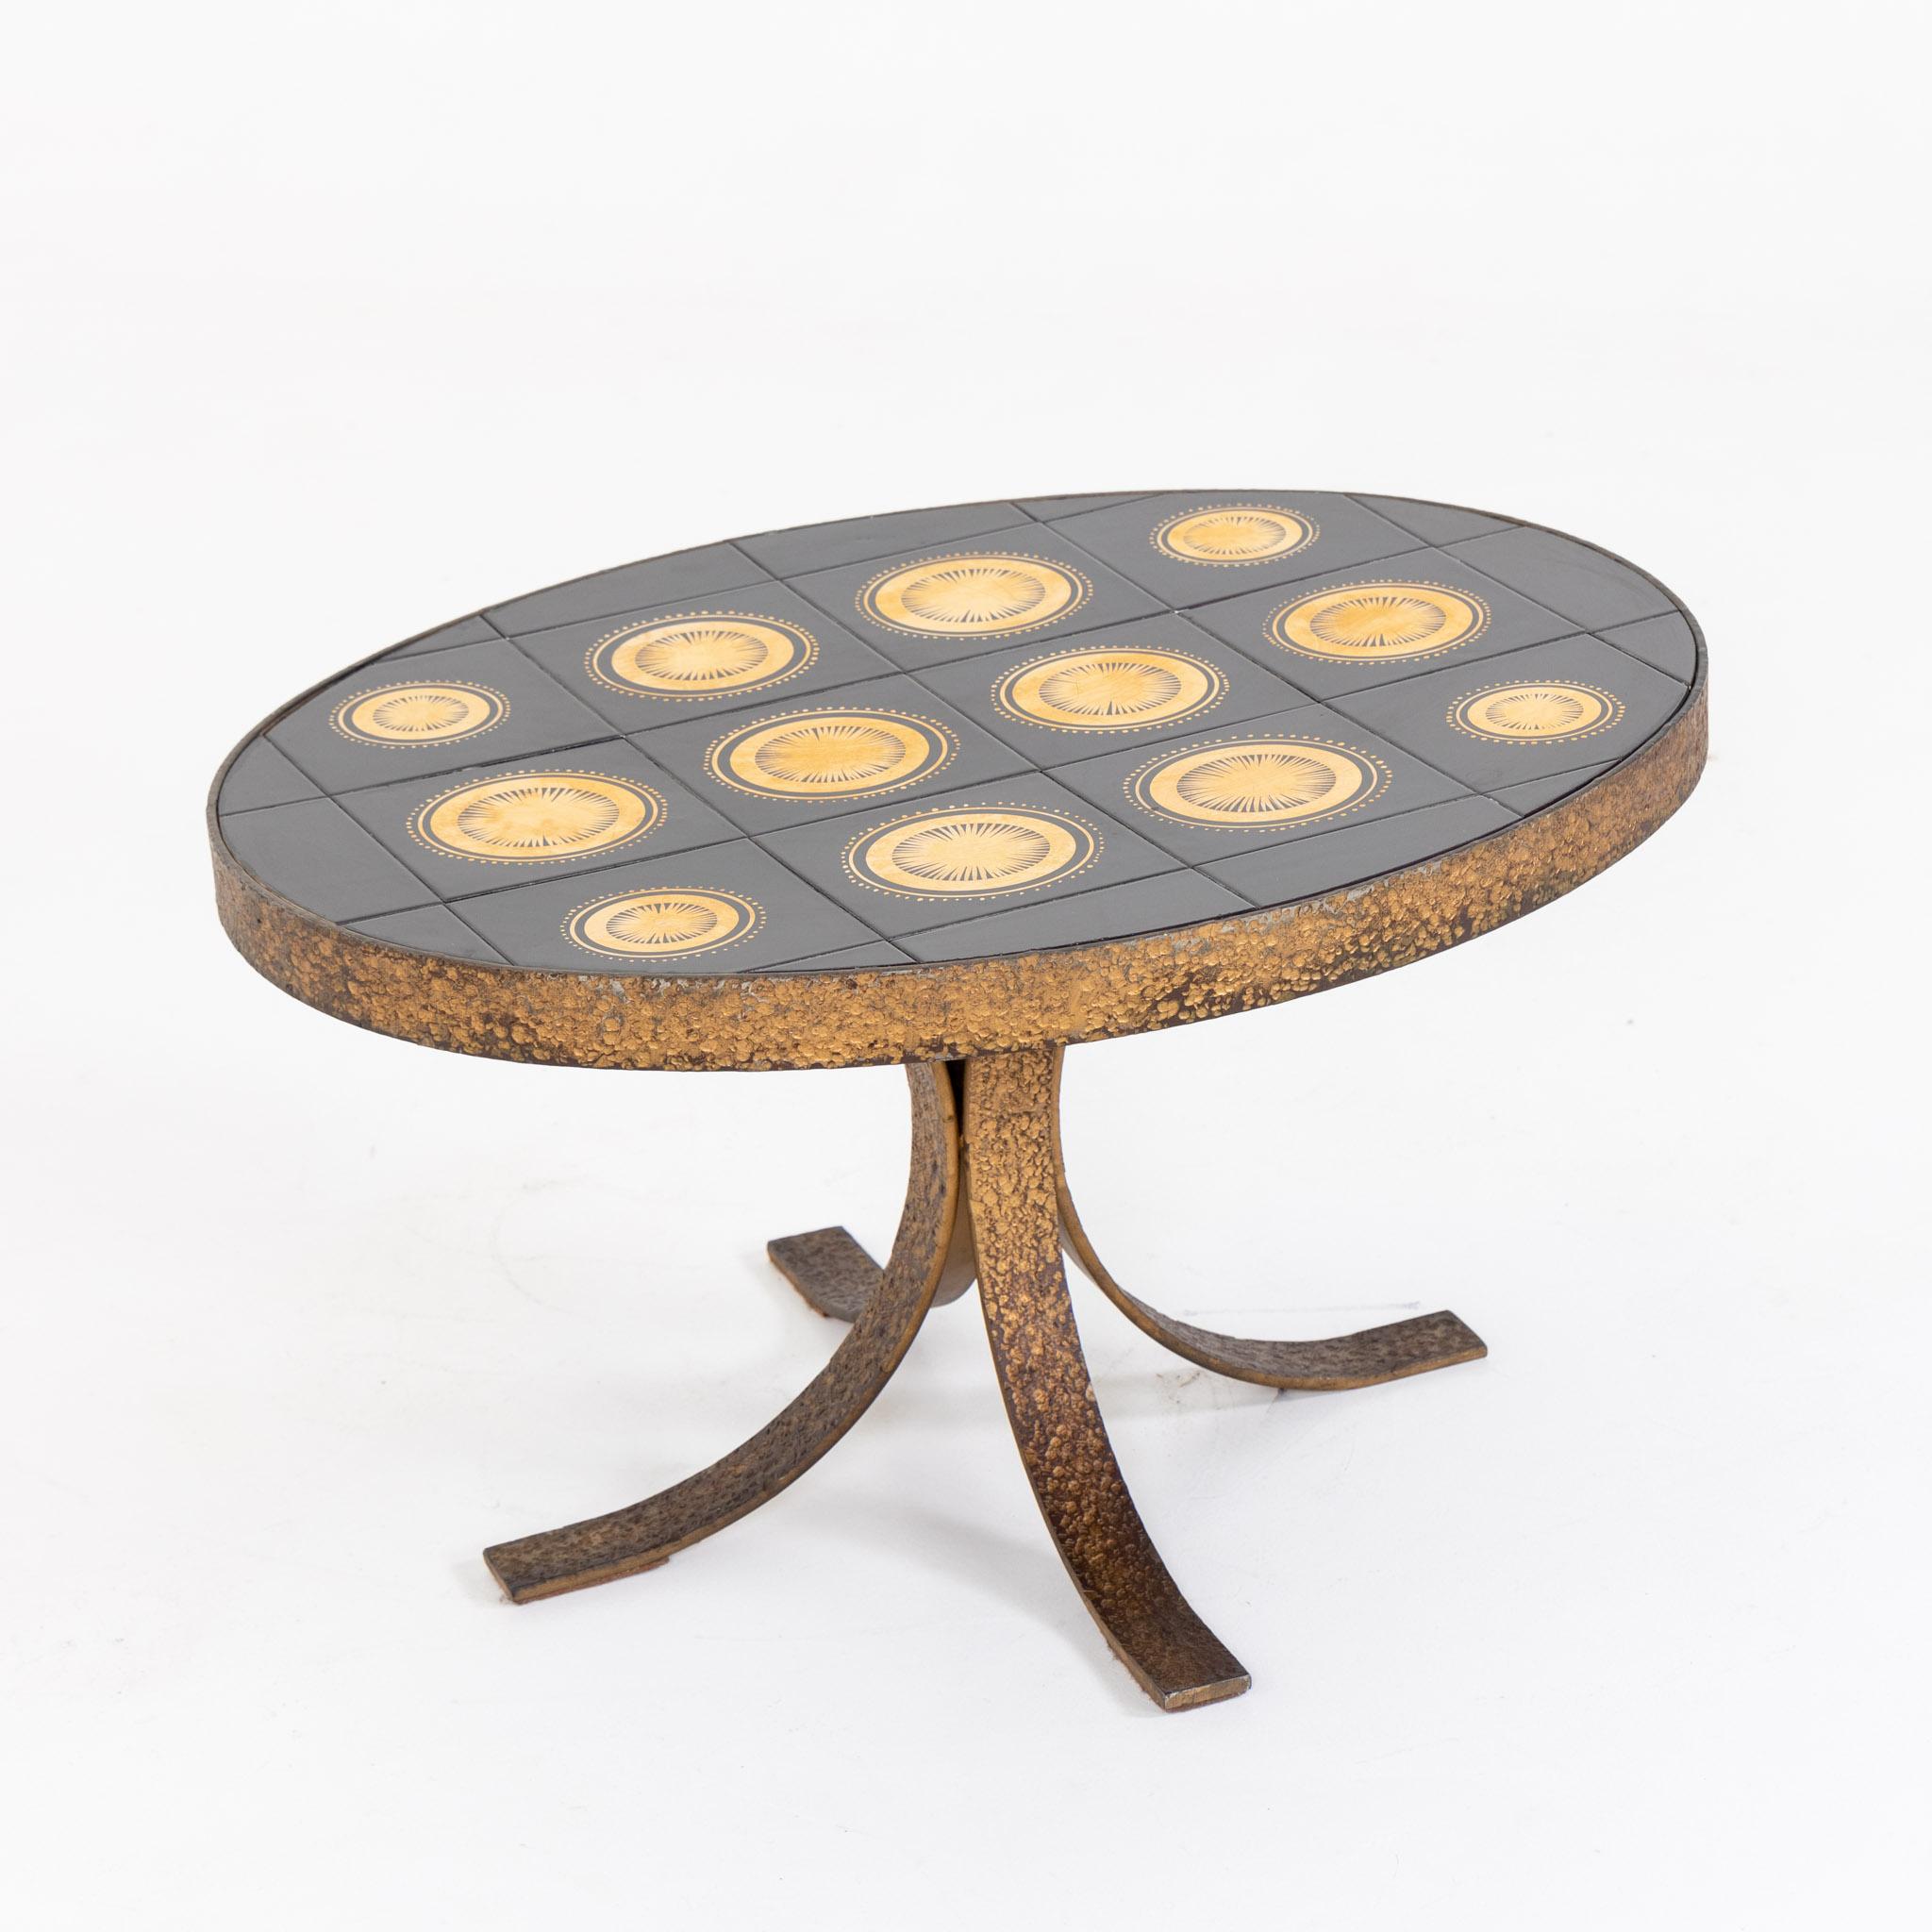 Small coffee table with oval table top and hammered metal frame. The table top is made of square black ceramic discs with golden radiating decorations. The metal base is attributed Pierluigi Colli.